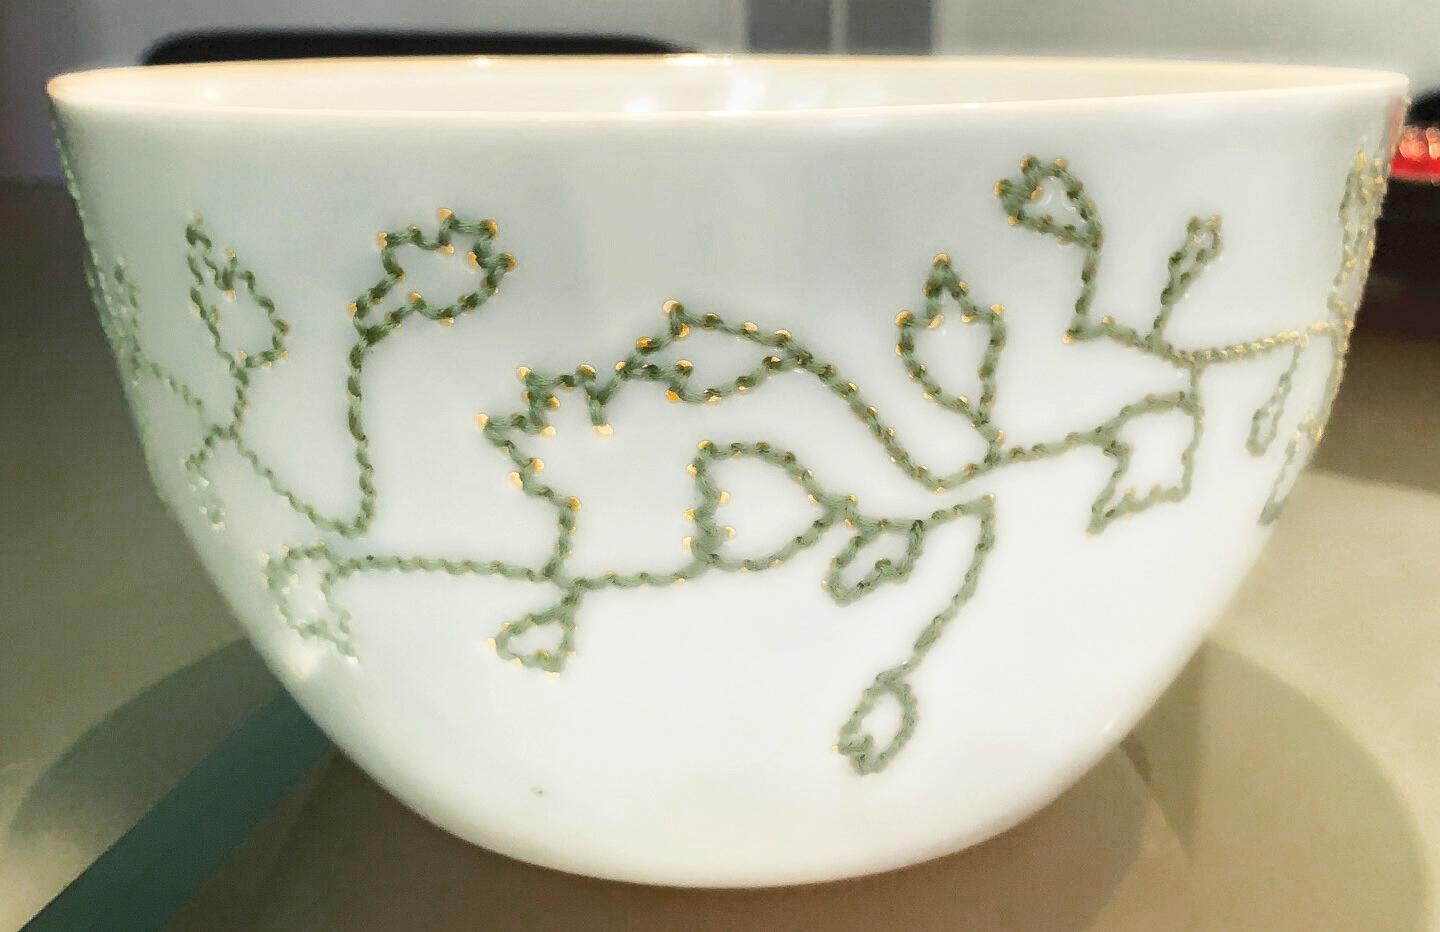 Hella Jongerius Rare and Important Embroidered Porcelain Bowl In Excellent Condition For Sale In Hamden, CT